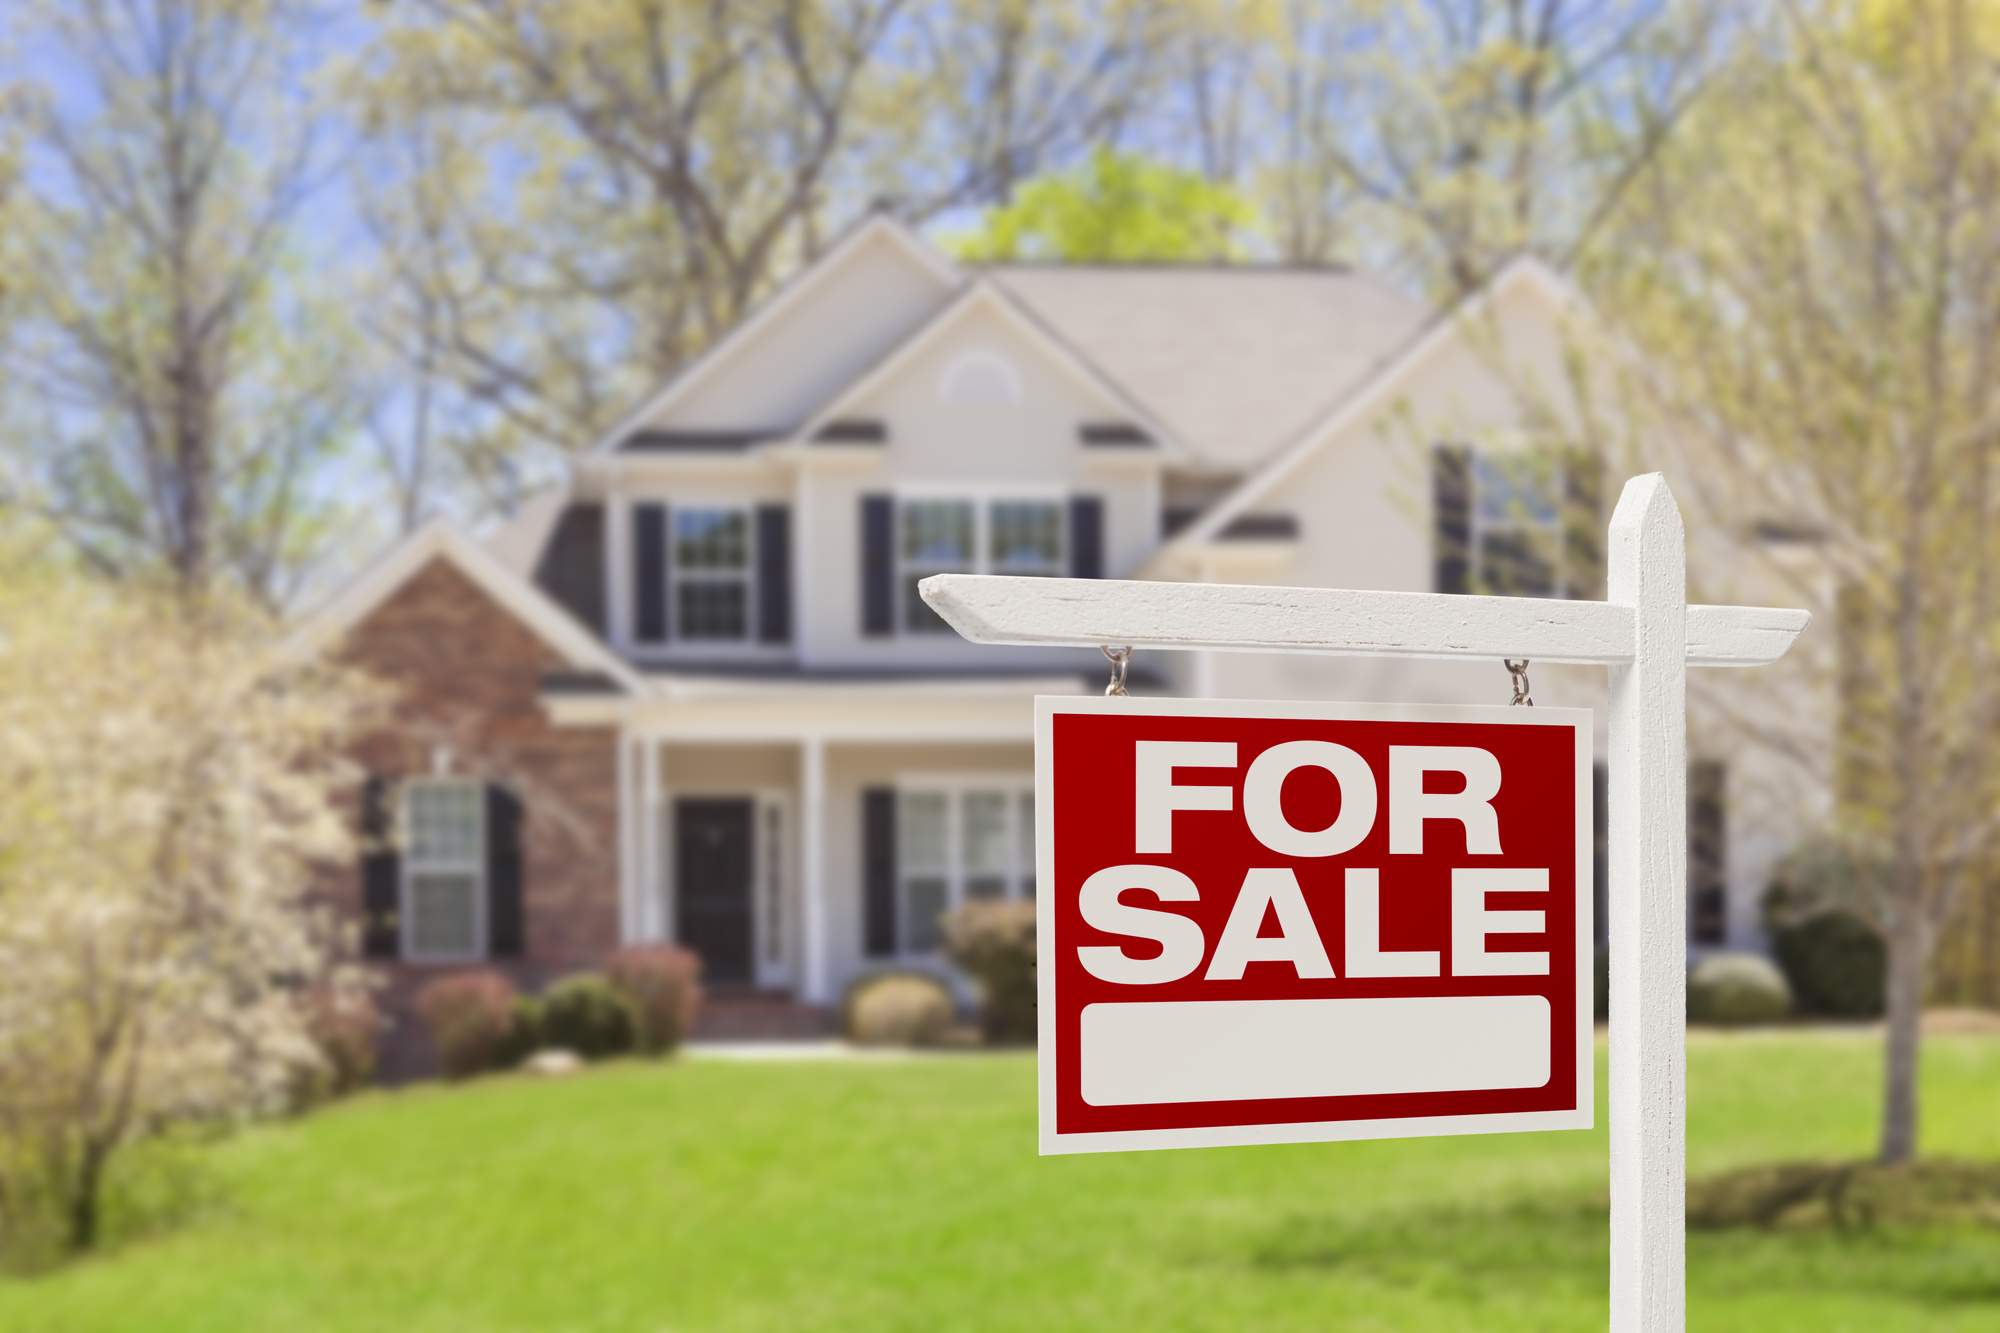 9 Things to Do When Preparing Your Home for Sale